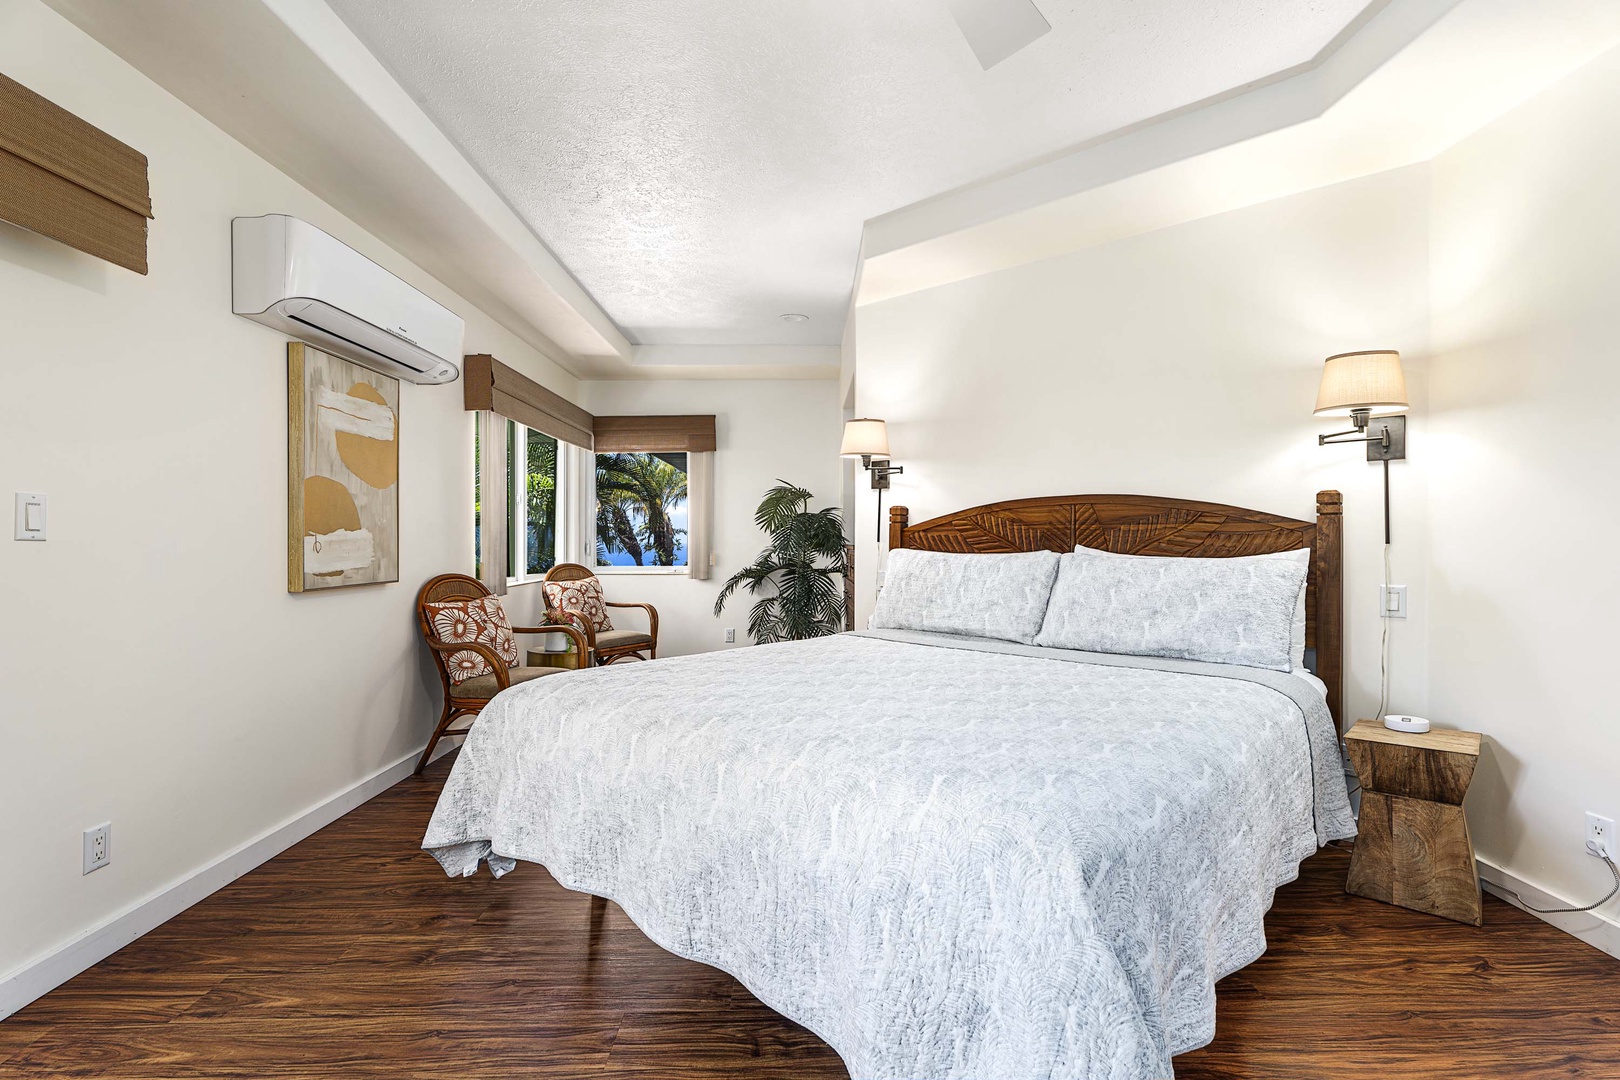 Kailua-Kona Vacation Rentals, Honu Hale - Primary Bedroom equipped with King bed, A/C, ensuite and Lanai access